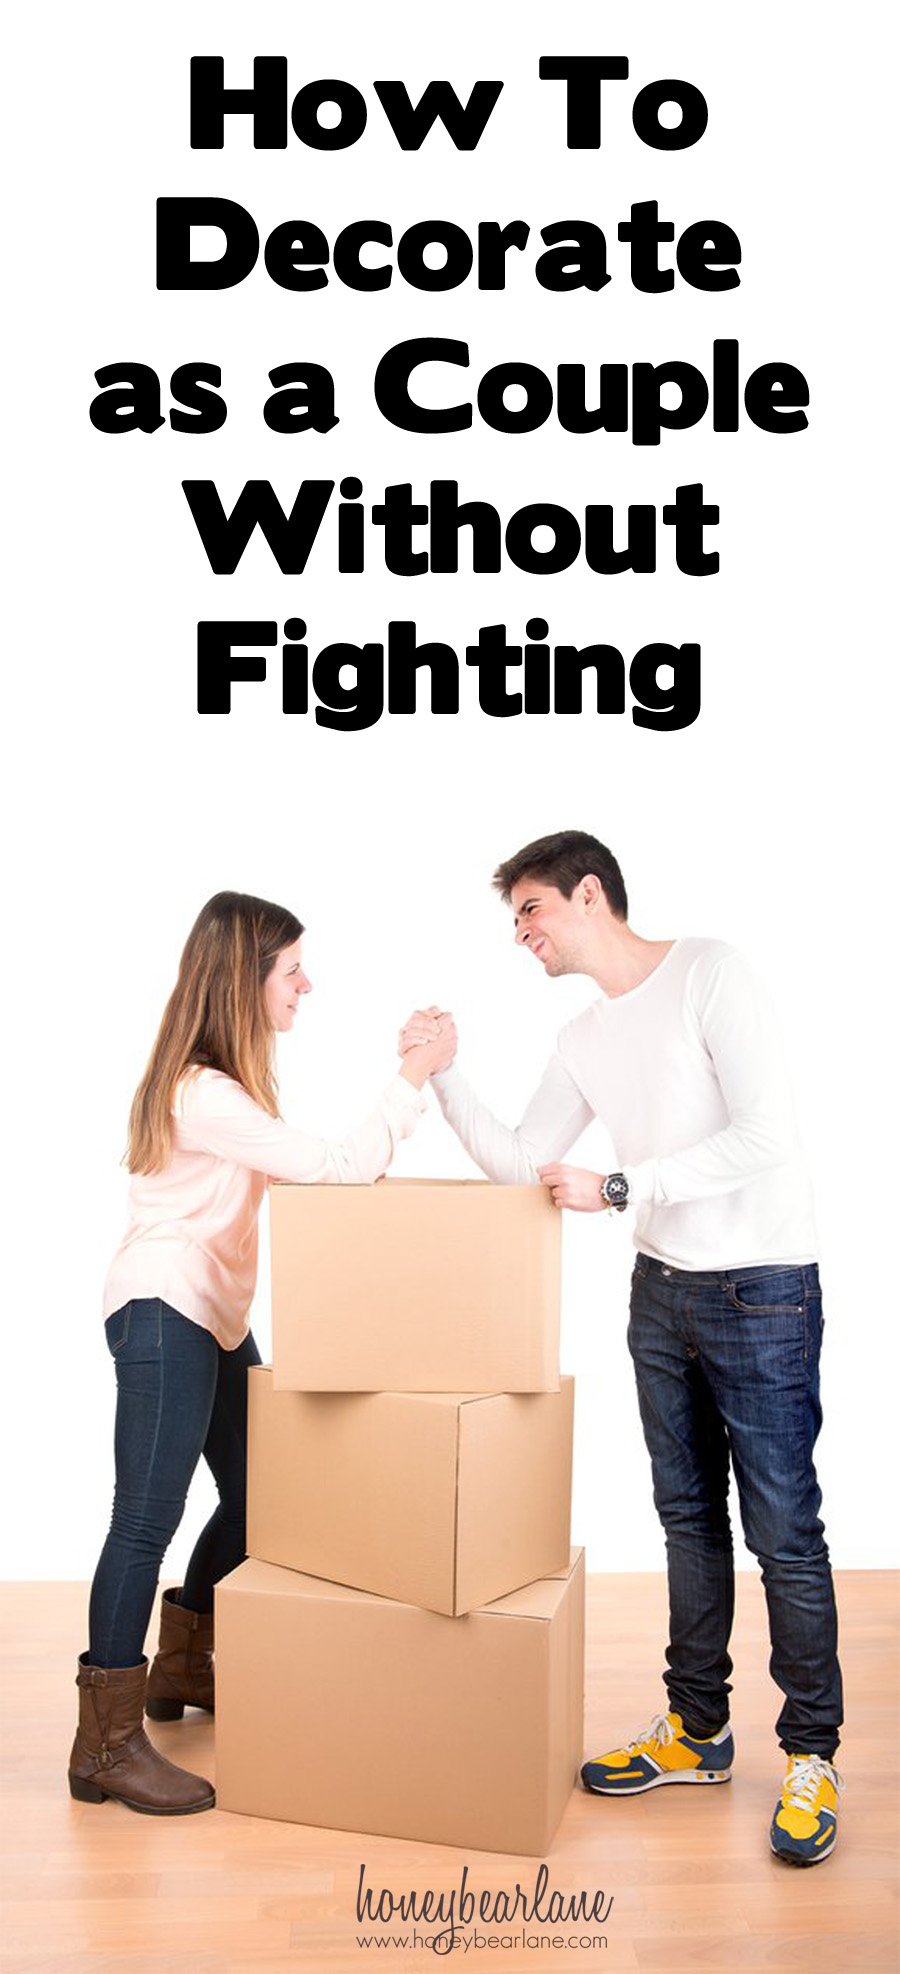 Without fighting